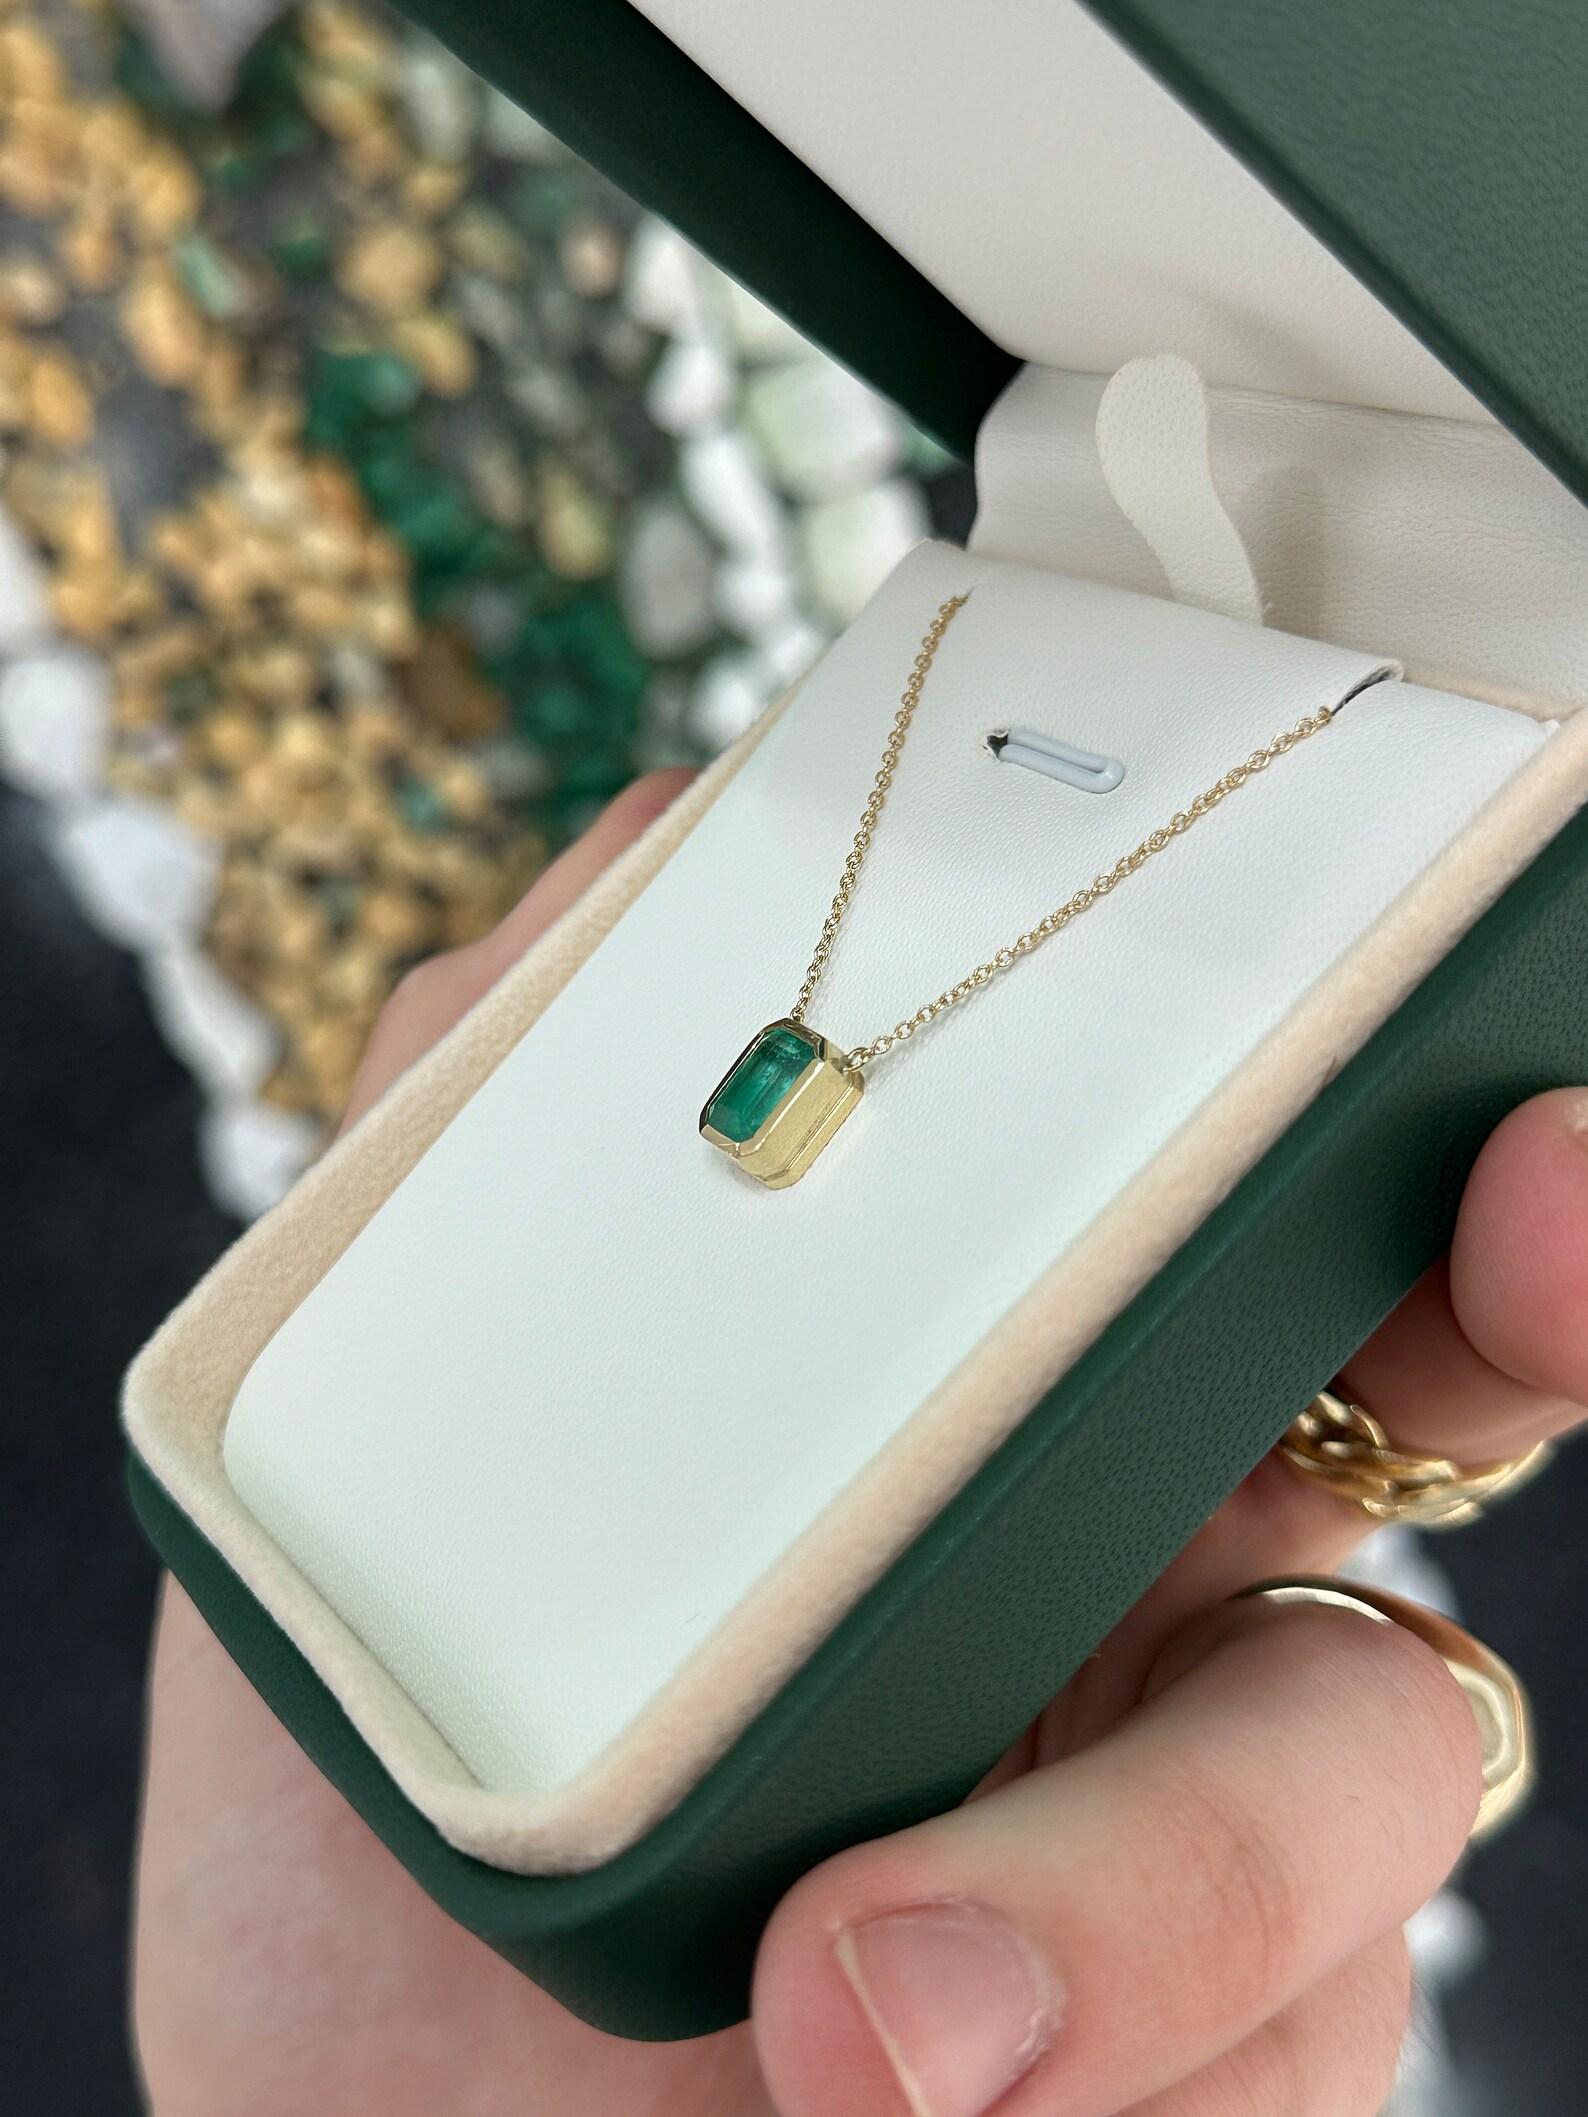 This stunning solitaire necklace features a vibrant medium green real emerald cut emerald, weighing just under two carats. The ethically sourced emerald is securely hand set in a sleek and modern bezel setting, which allows the beauty of the